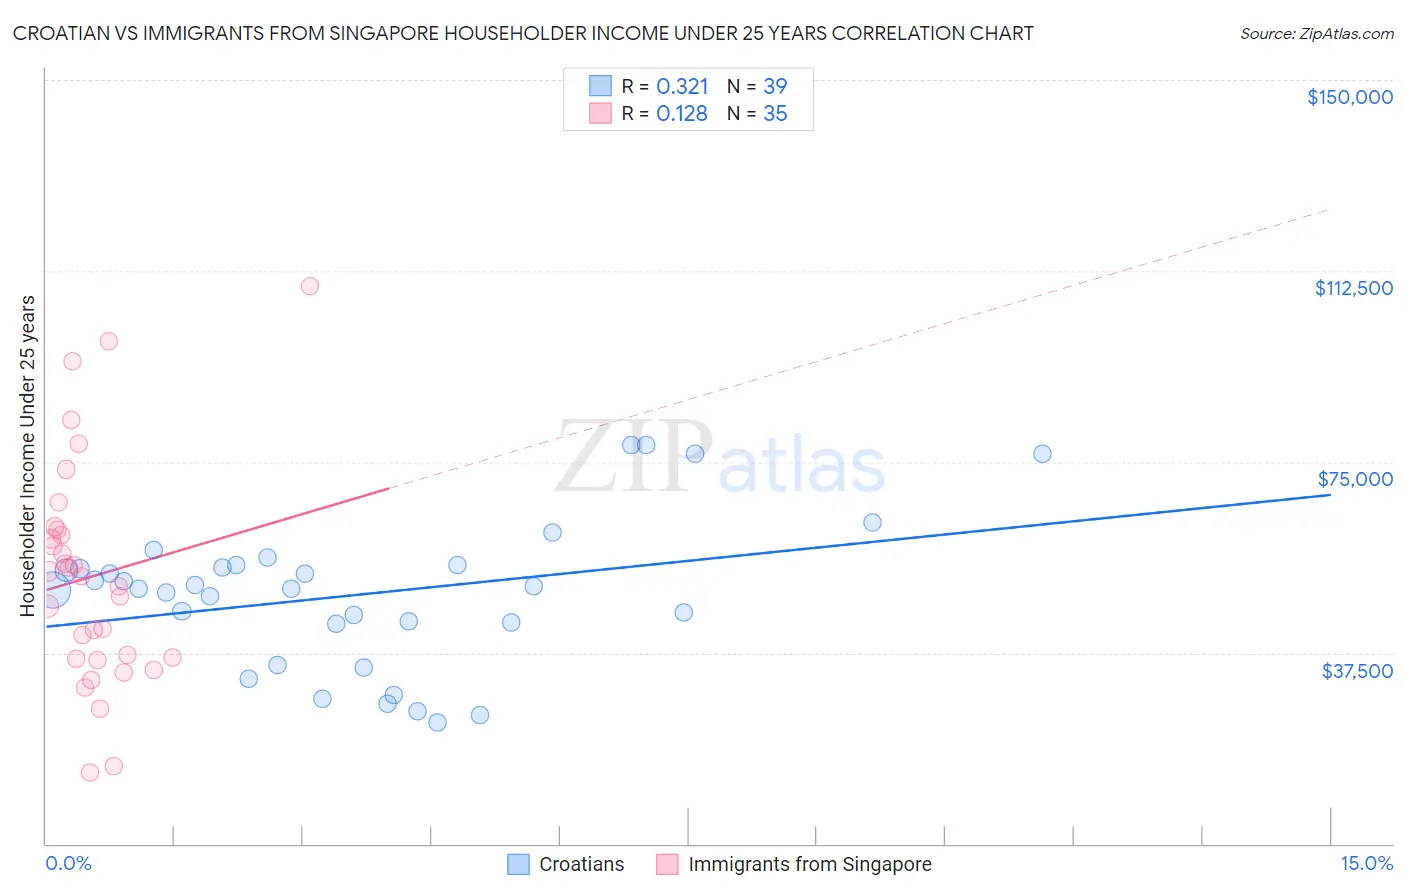 Croatian vs Immigrants from Singapore Householder Income Under 25 years